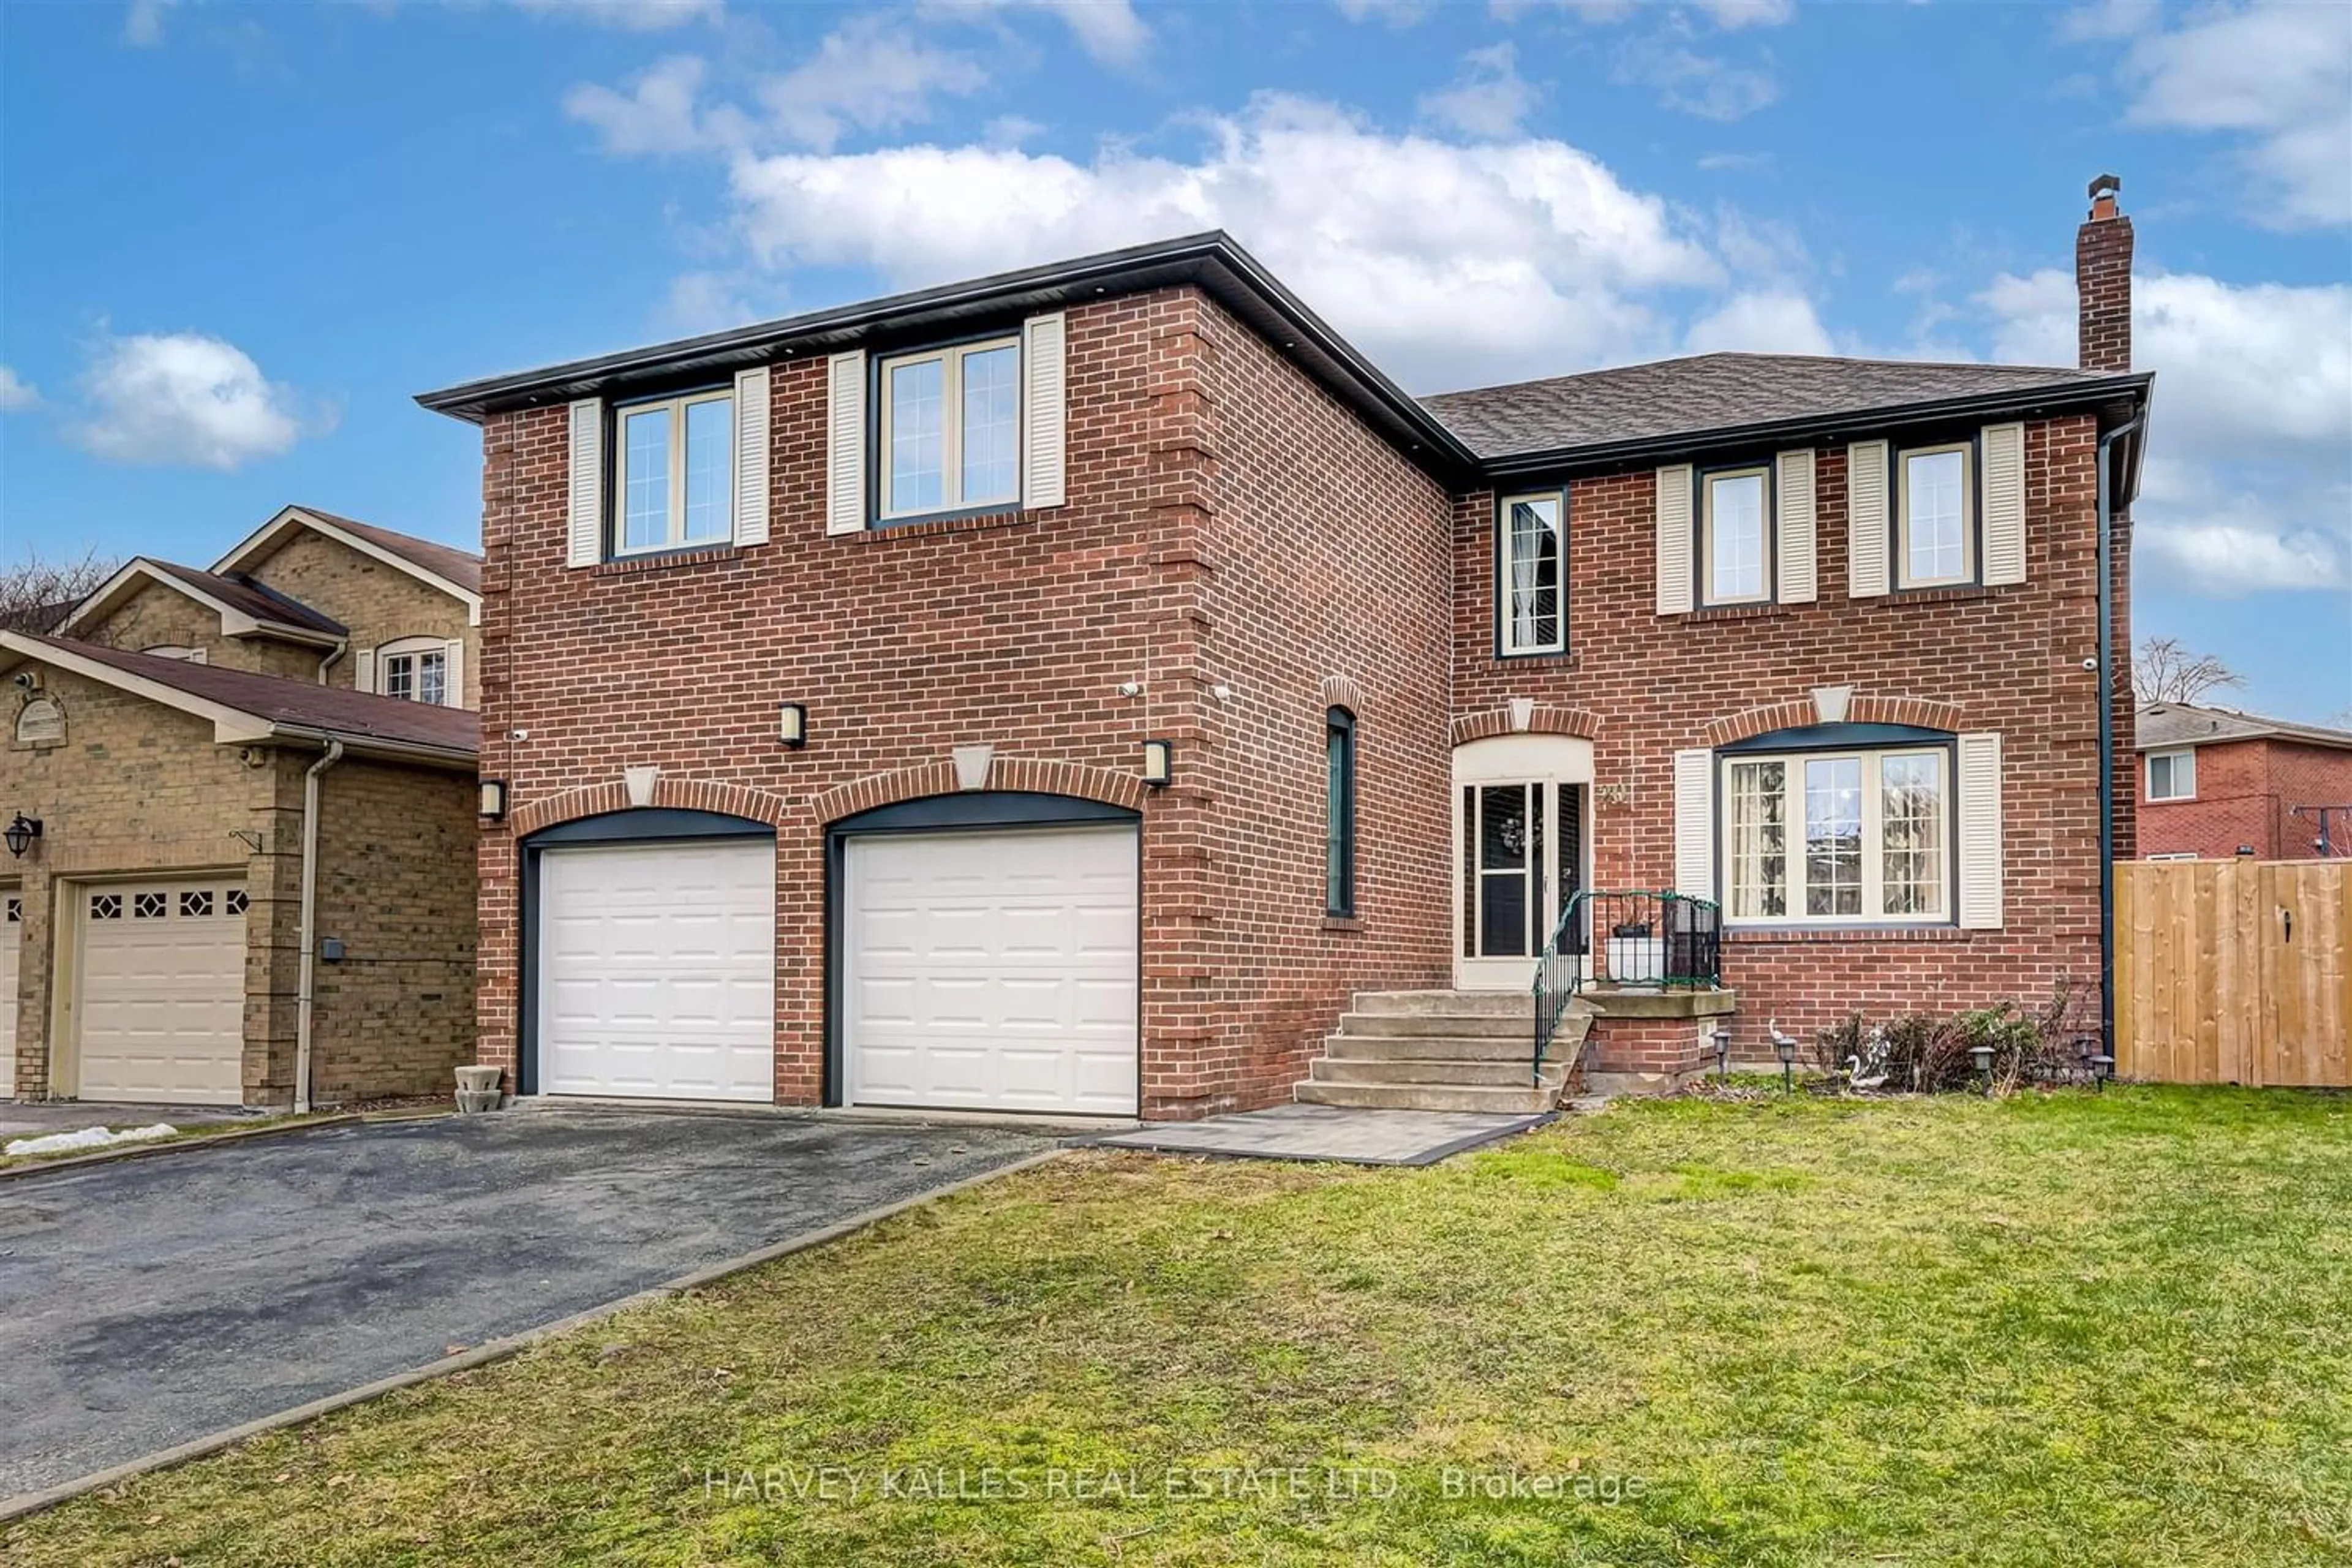 Home with brick exterior material for 20 Timothy Crt, Toronto Ontario M9P 3T8